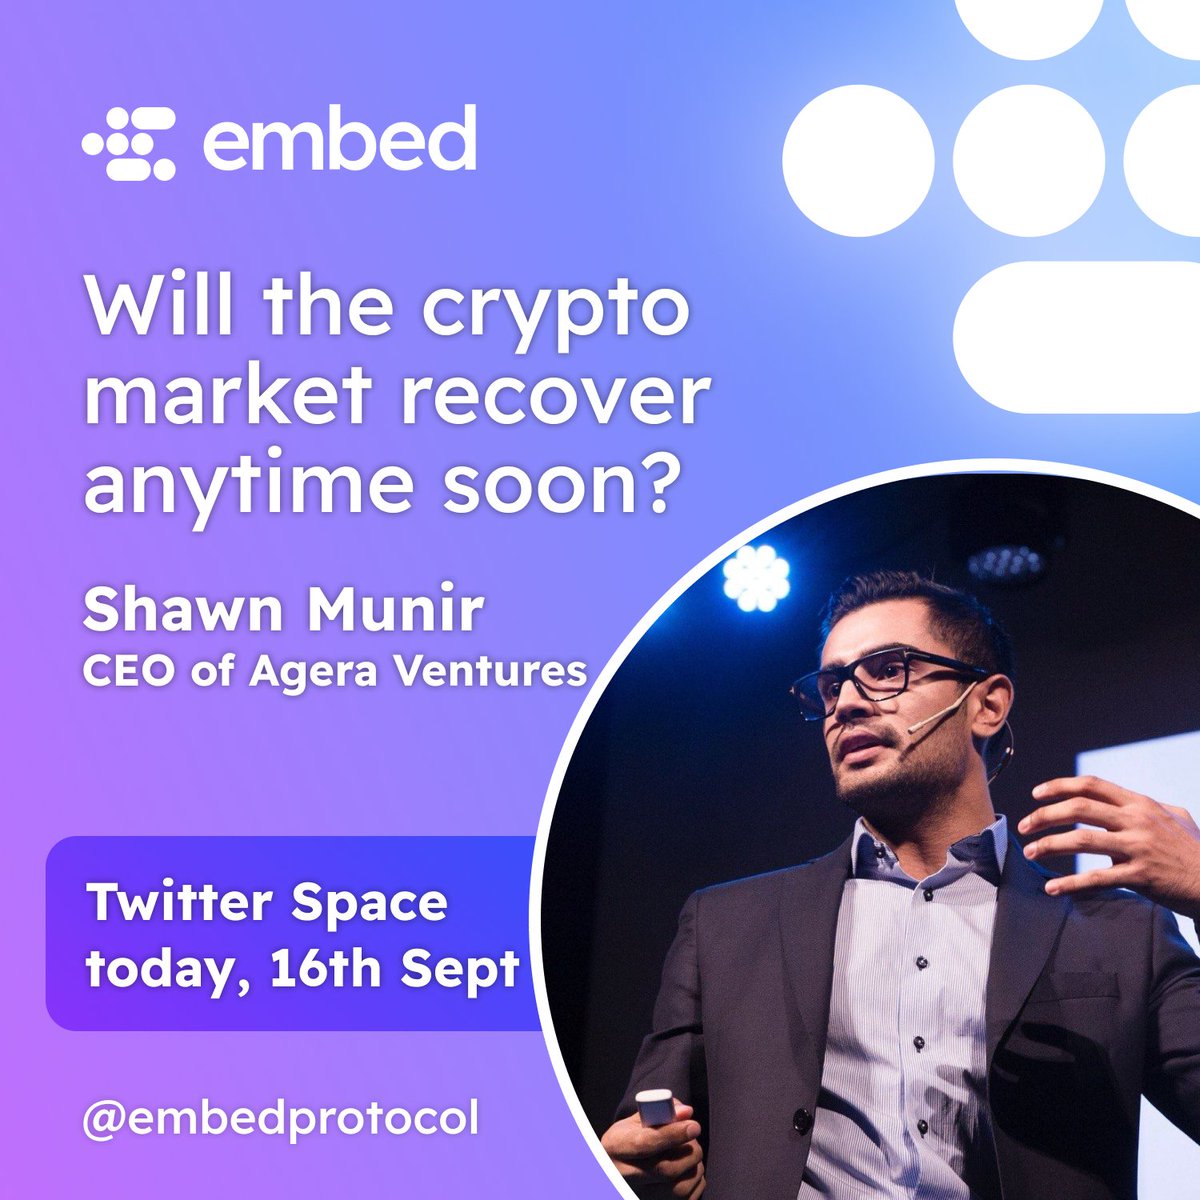 Embed Space Series 🎙️ Join our Twitter Space today at 3pm UTC with @munirshawn founder and CEO of Agera Ventures speaking about the Ethereum merge and what to expect next in the crypto market! 🔔Set A Reminder here 👇👇👇 twitter.com/i/spaces/1MYxN…